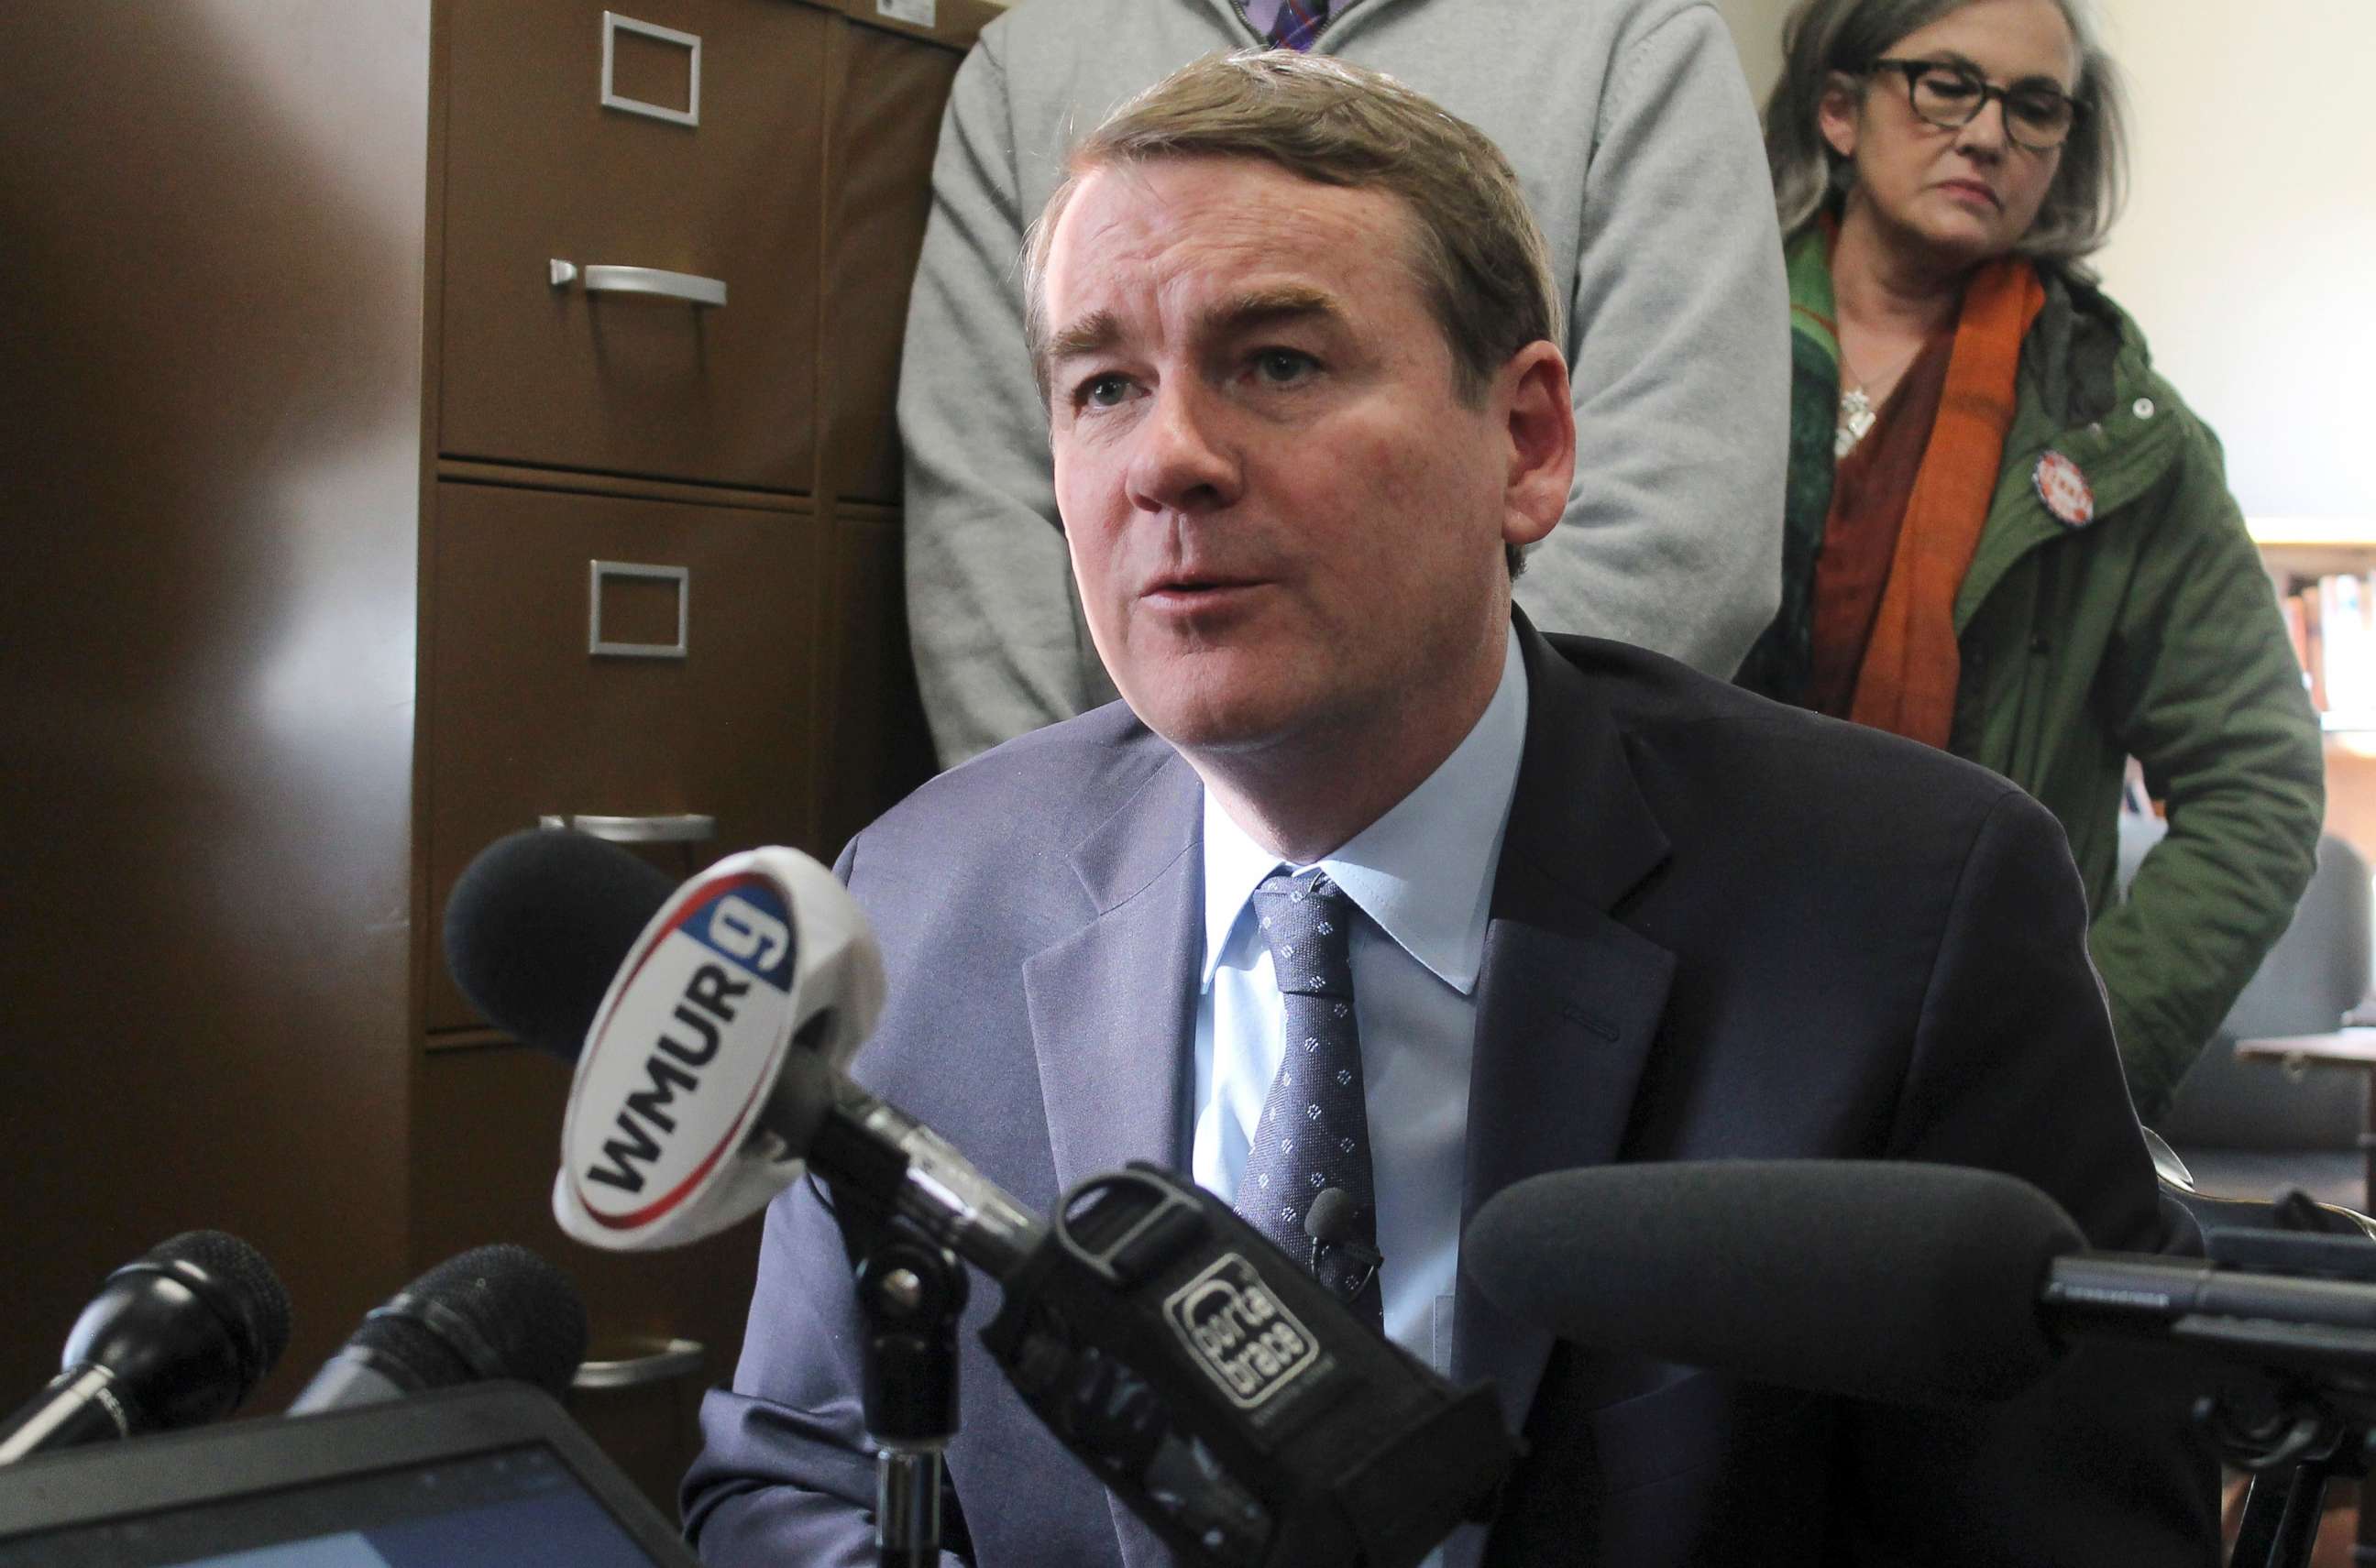 PHOTO: Democratic presidential candidate Sen. Michael Bennet speaks to the media in the New Hampshire secretary of state's office, Nov. 6, 2019, in Concord, N.H., after filing to be on the state's first-in-the-nation presidential primary ballot.